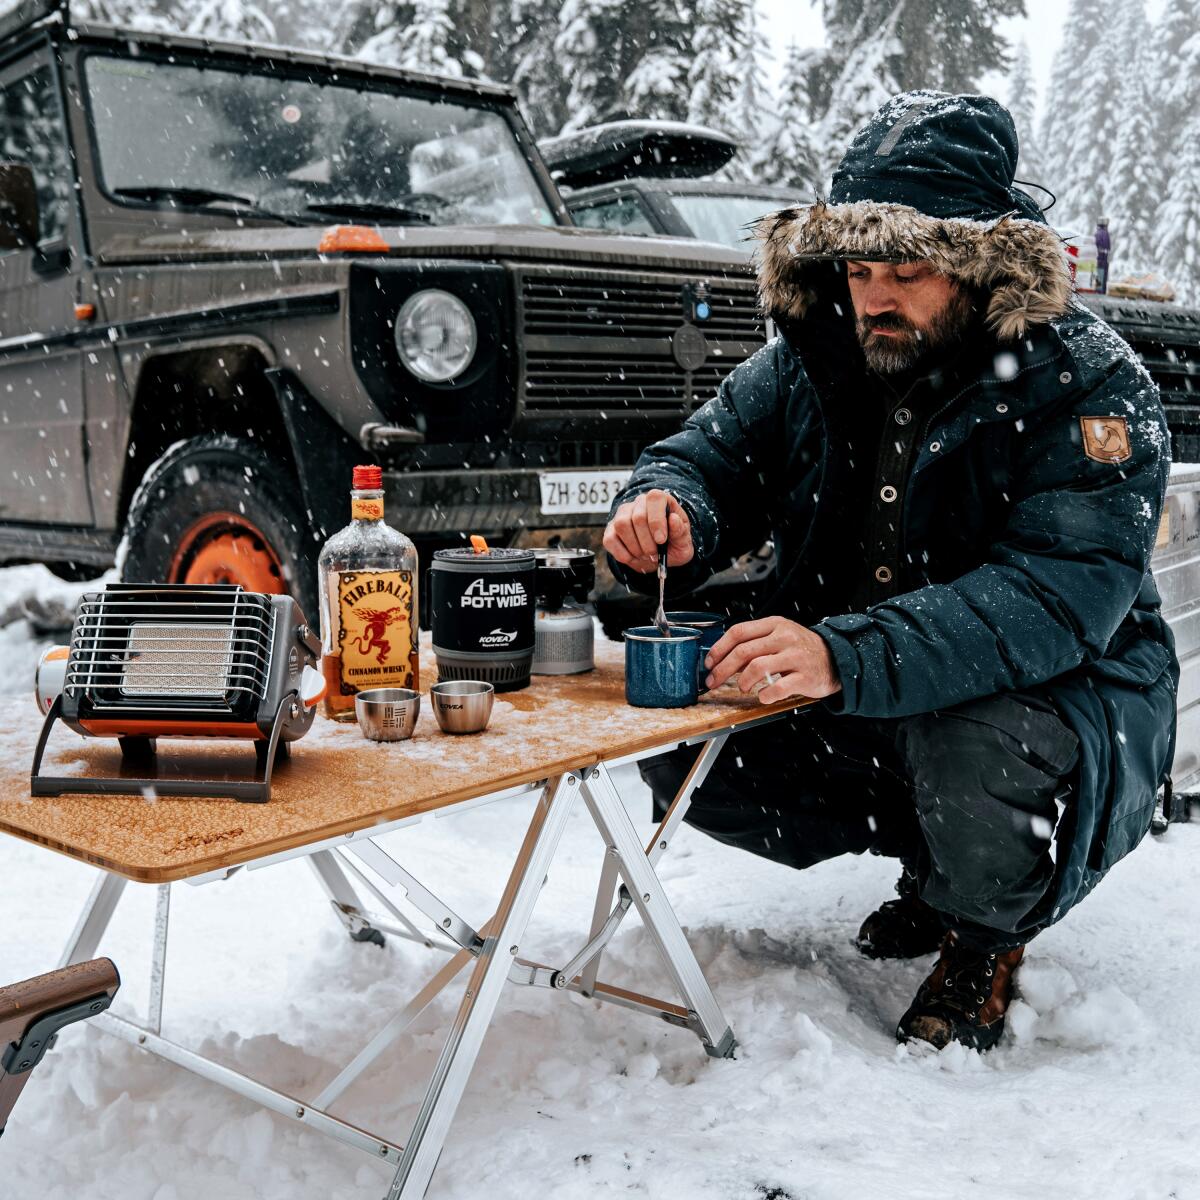 A man in the snow having a drink with his overland vehicle in the background.